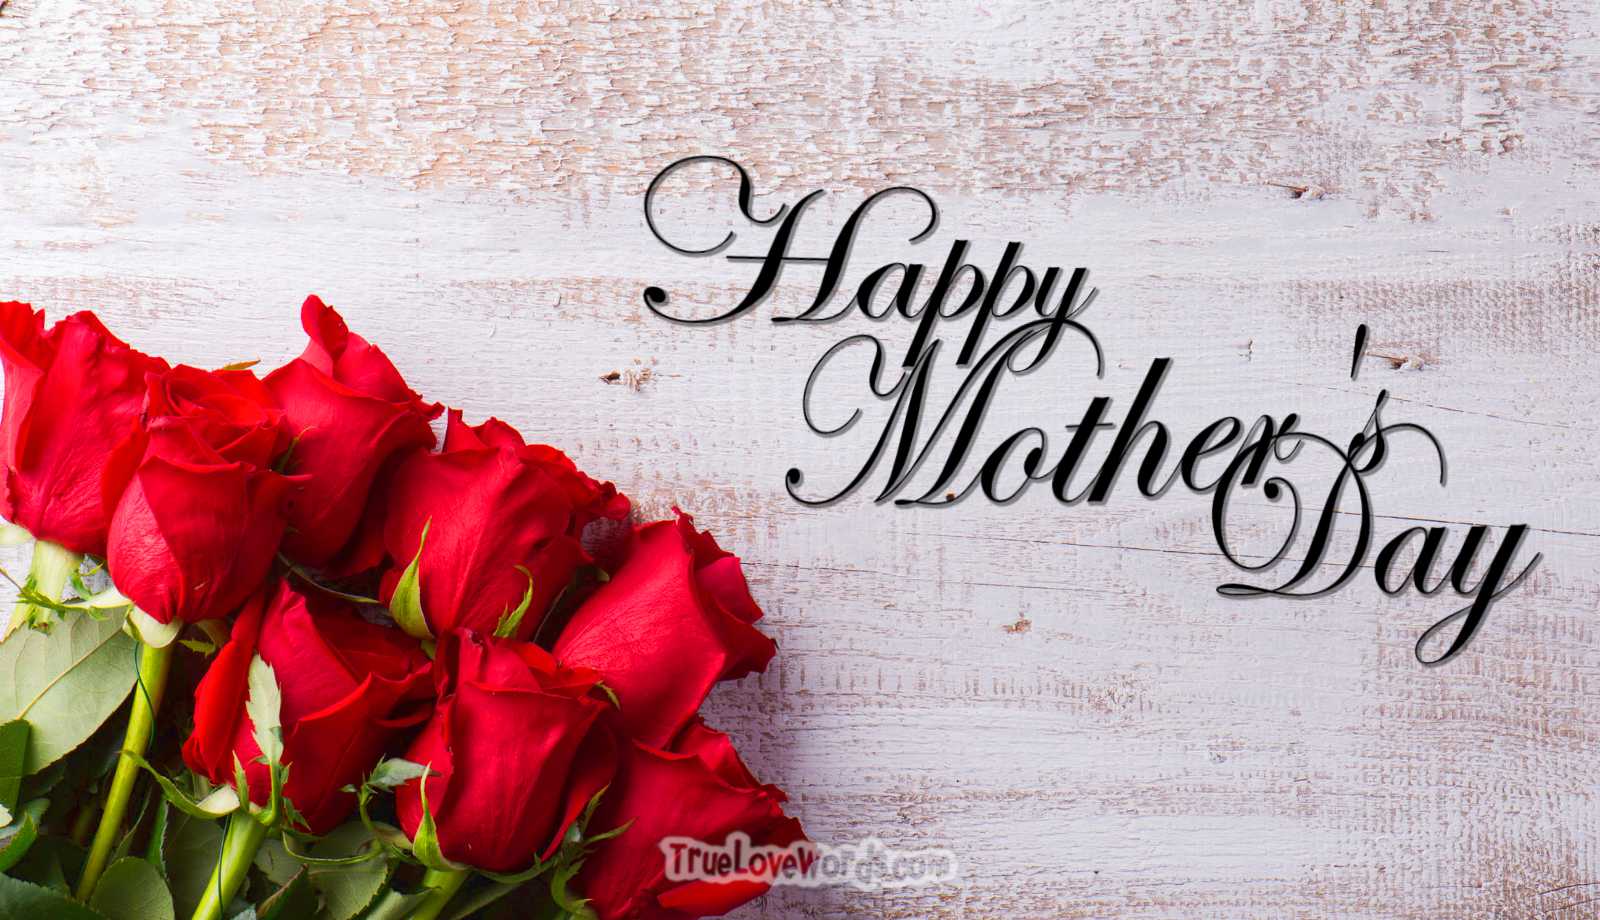 Mother's Day 2020: 50 Happy Mother's Day Messages, Prayers And Quotes